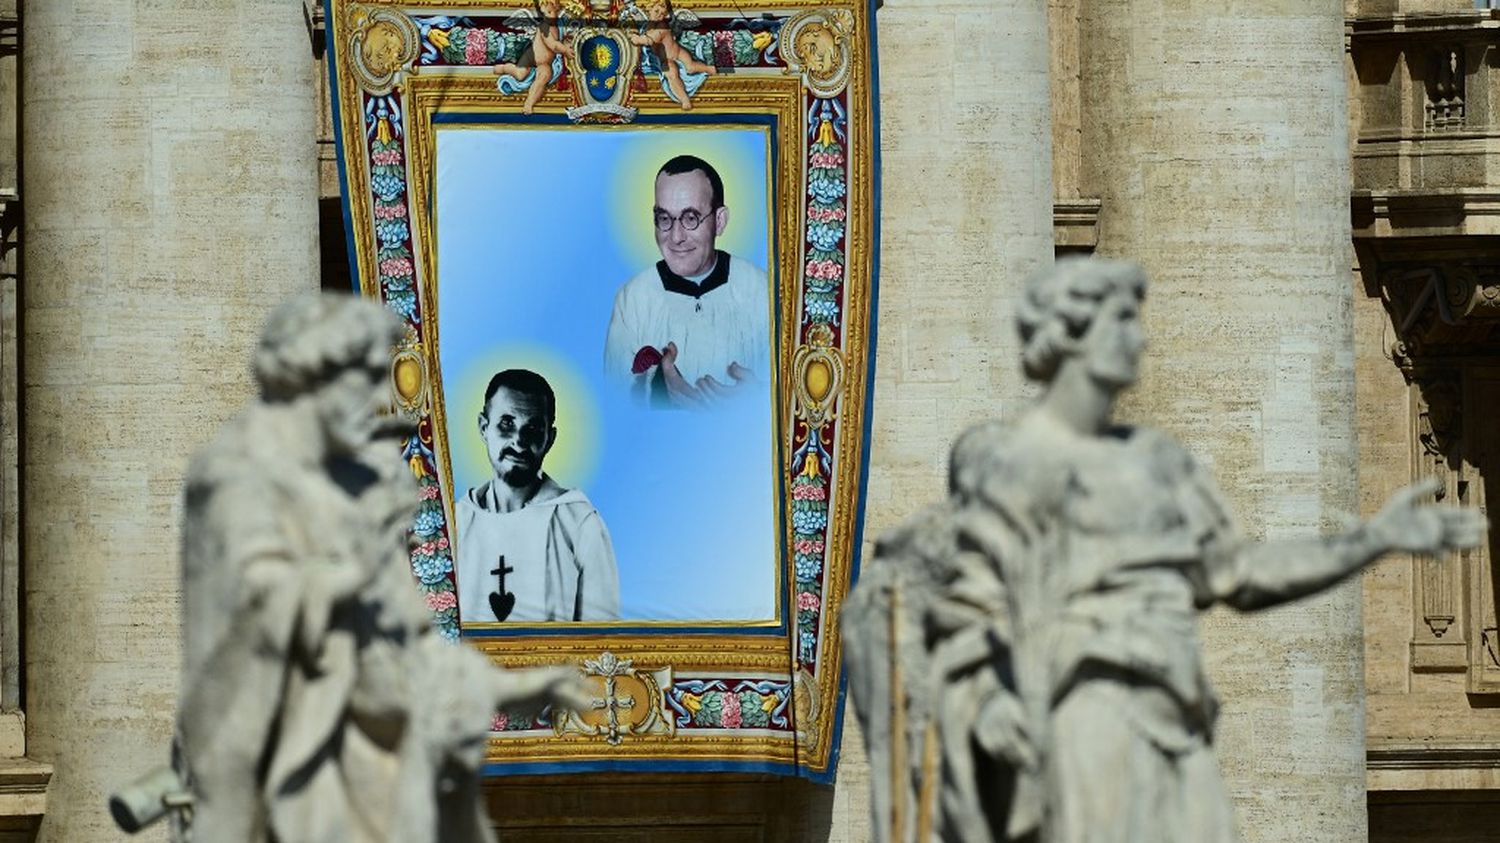 Three French clerics, including desert hermit Charles de Foucauld, have been canonized by Pope Francis in Rome
